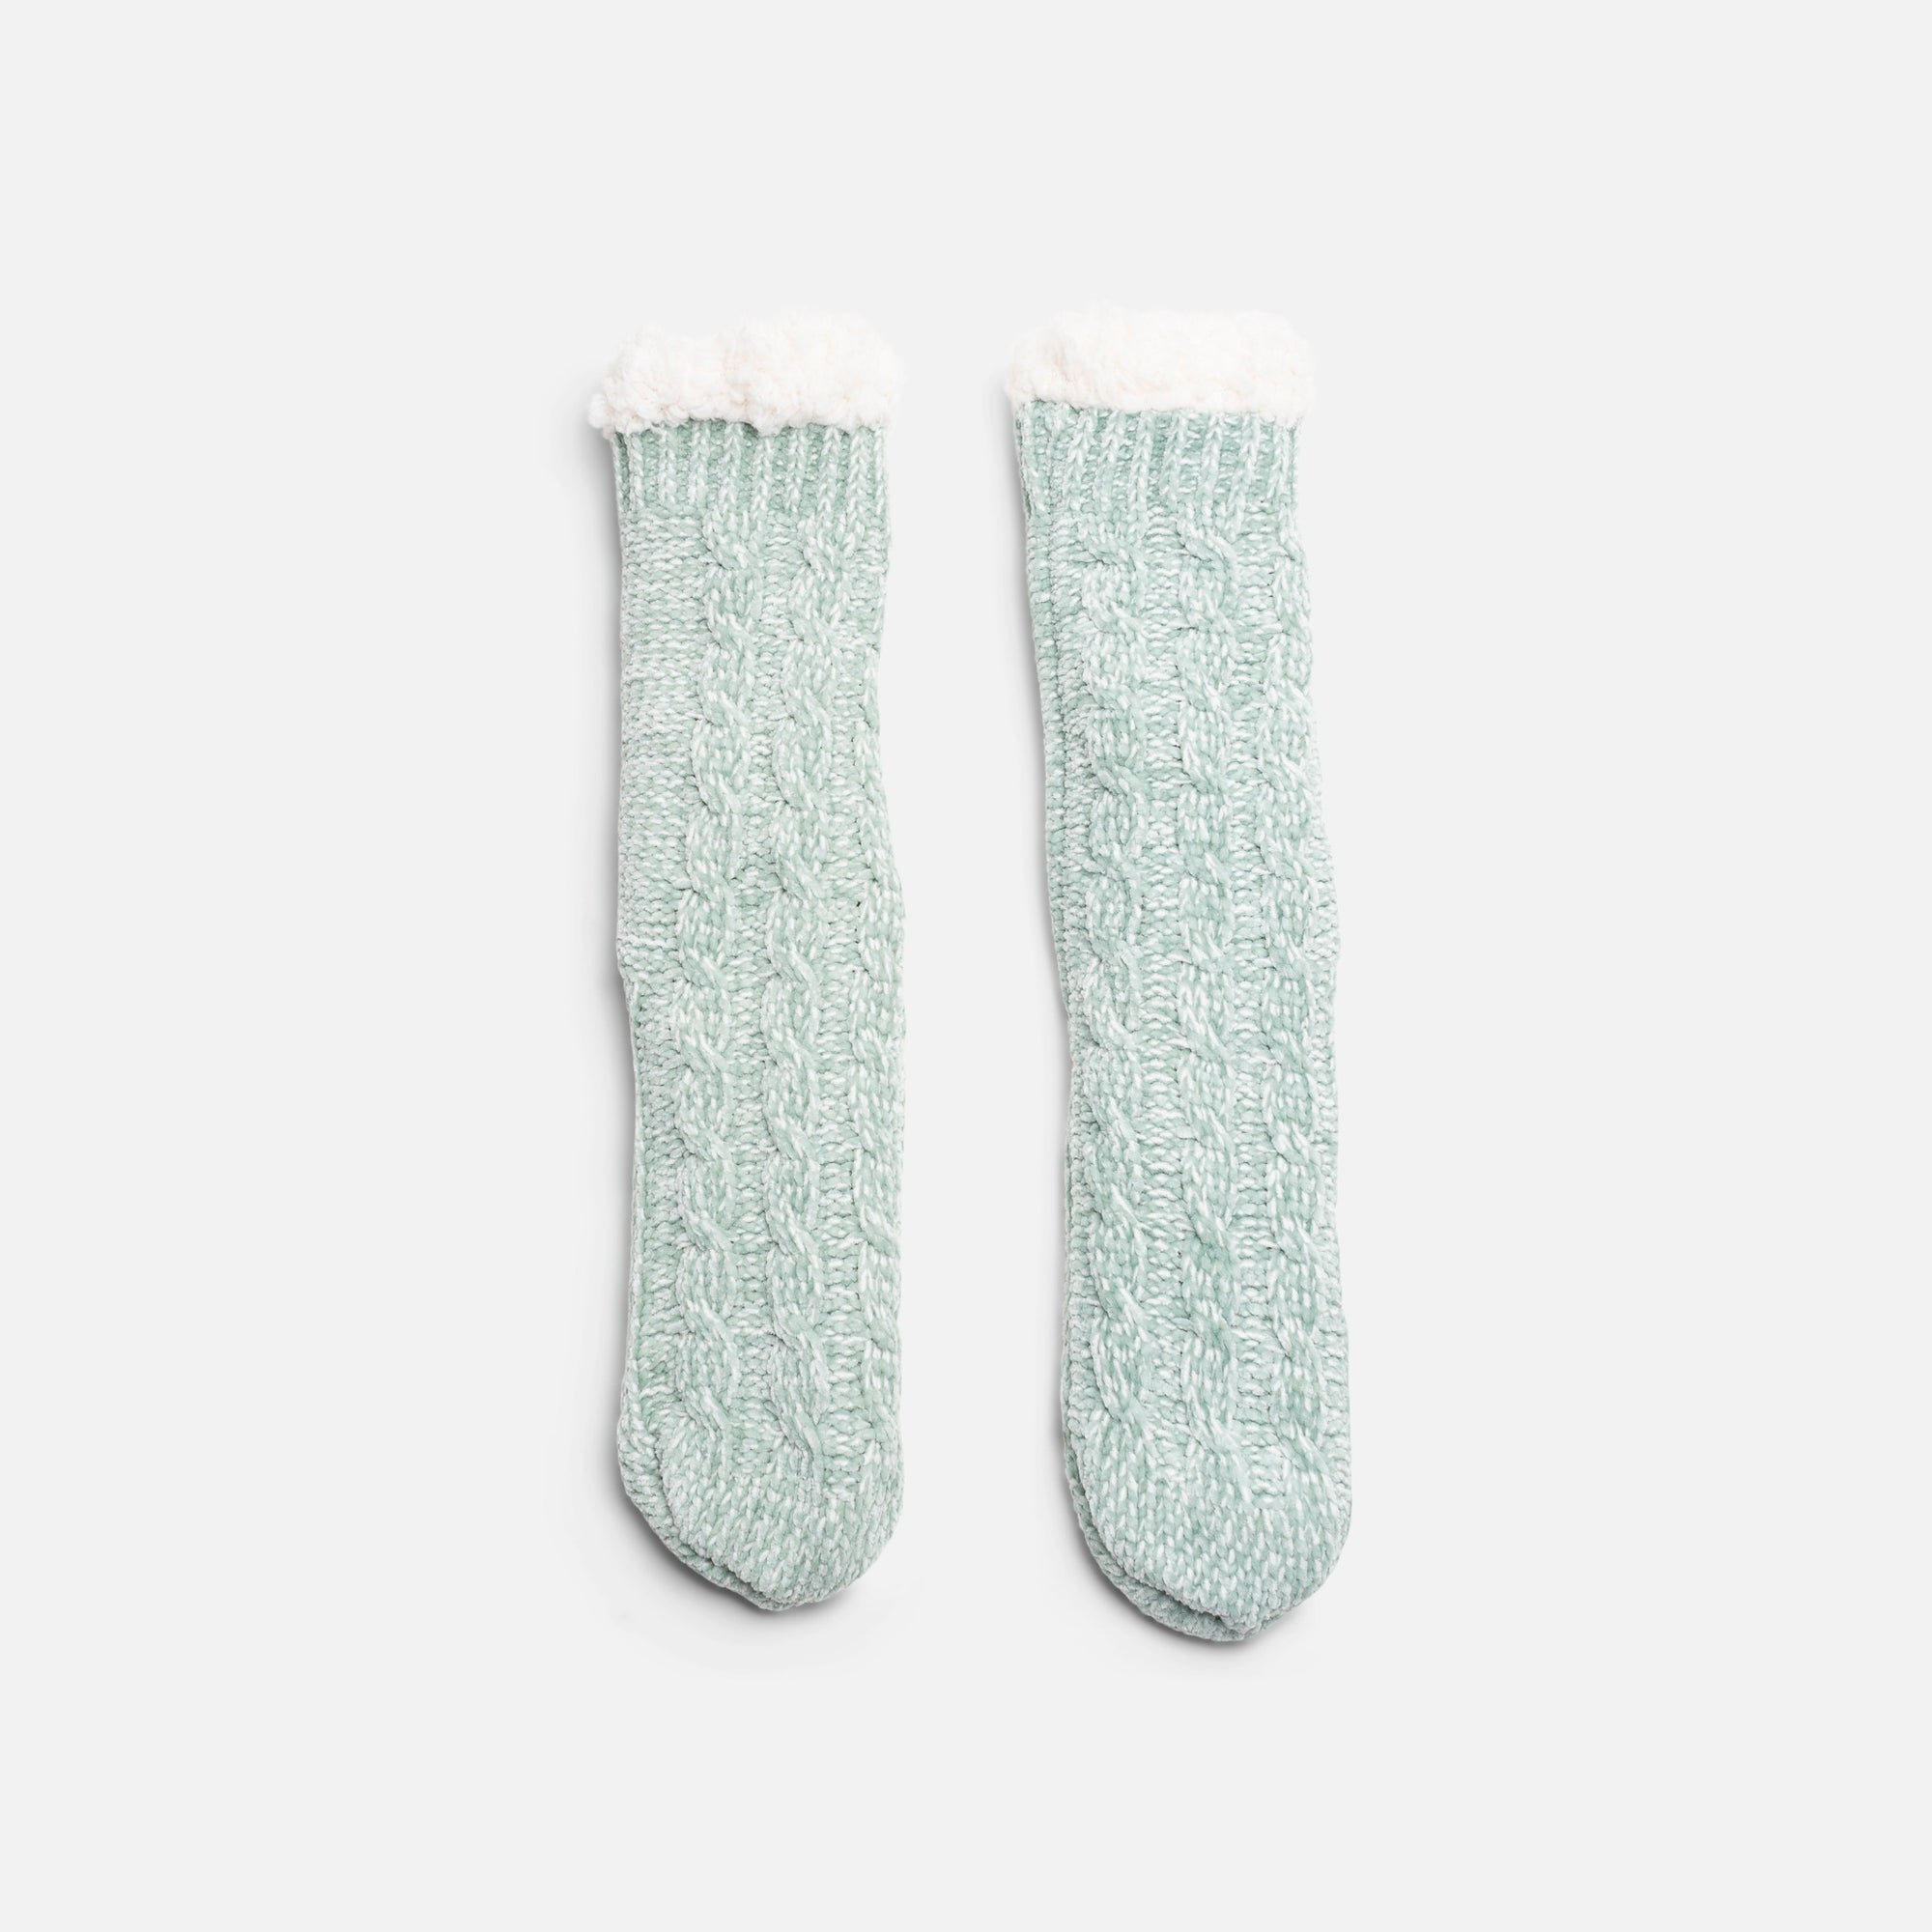 Green slipper socks with wide knitted fabric